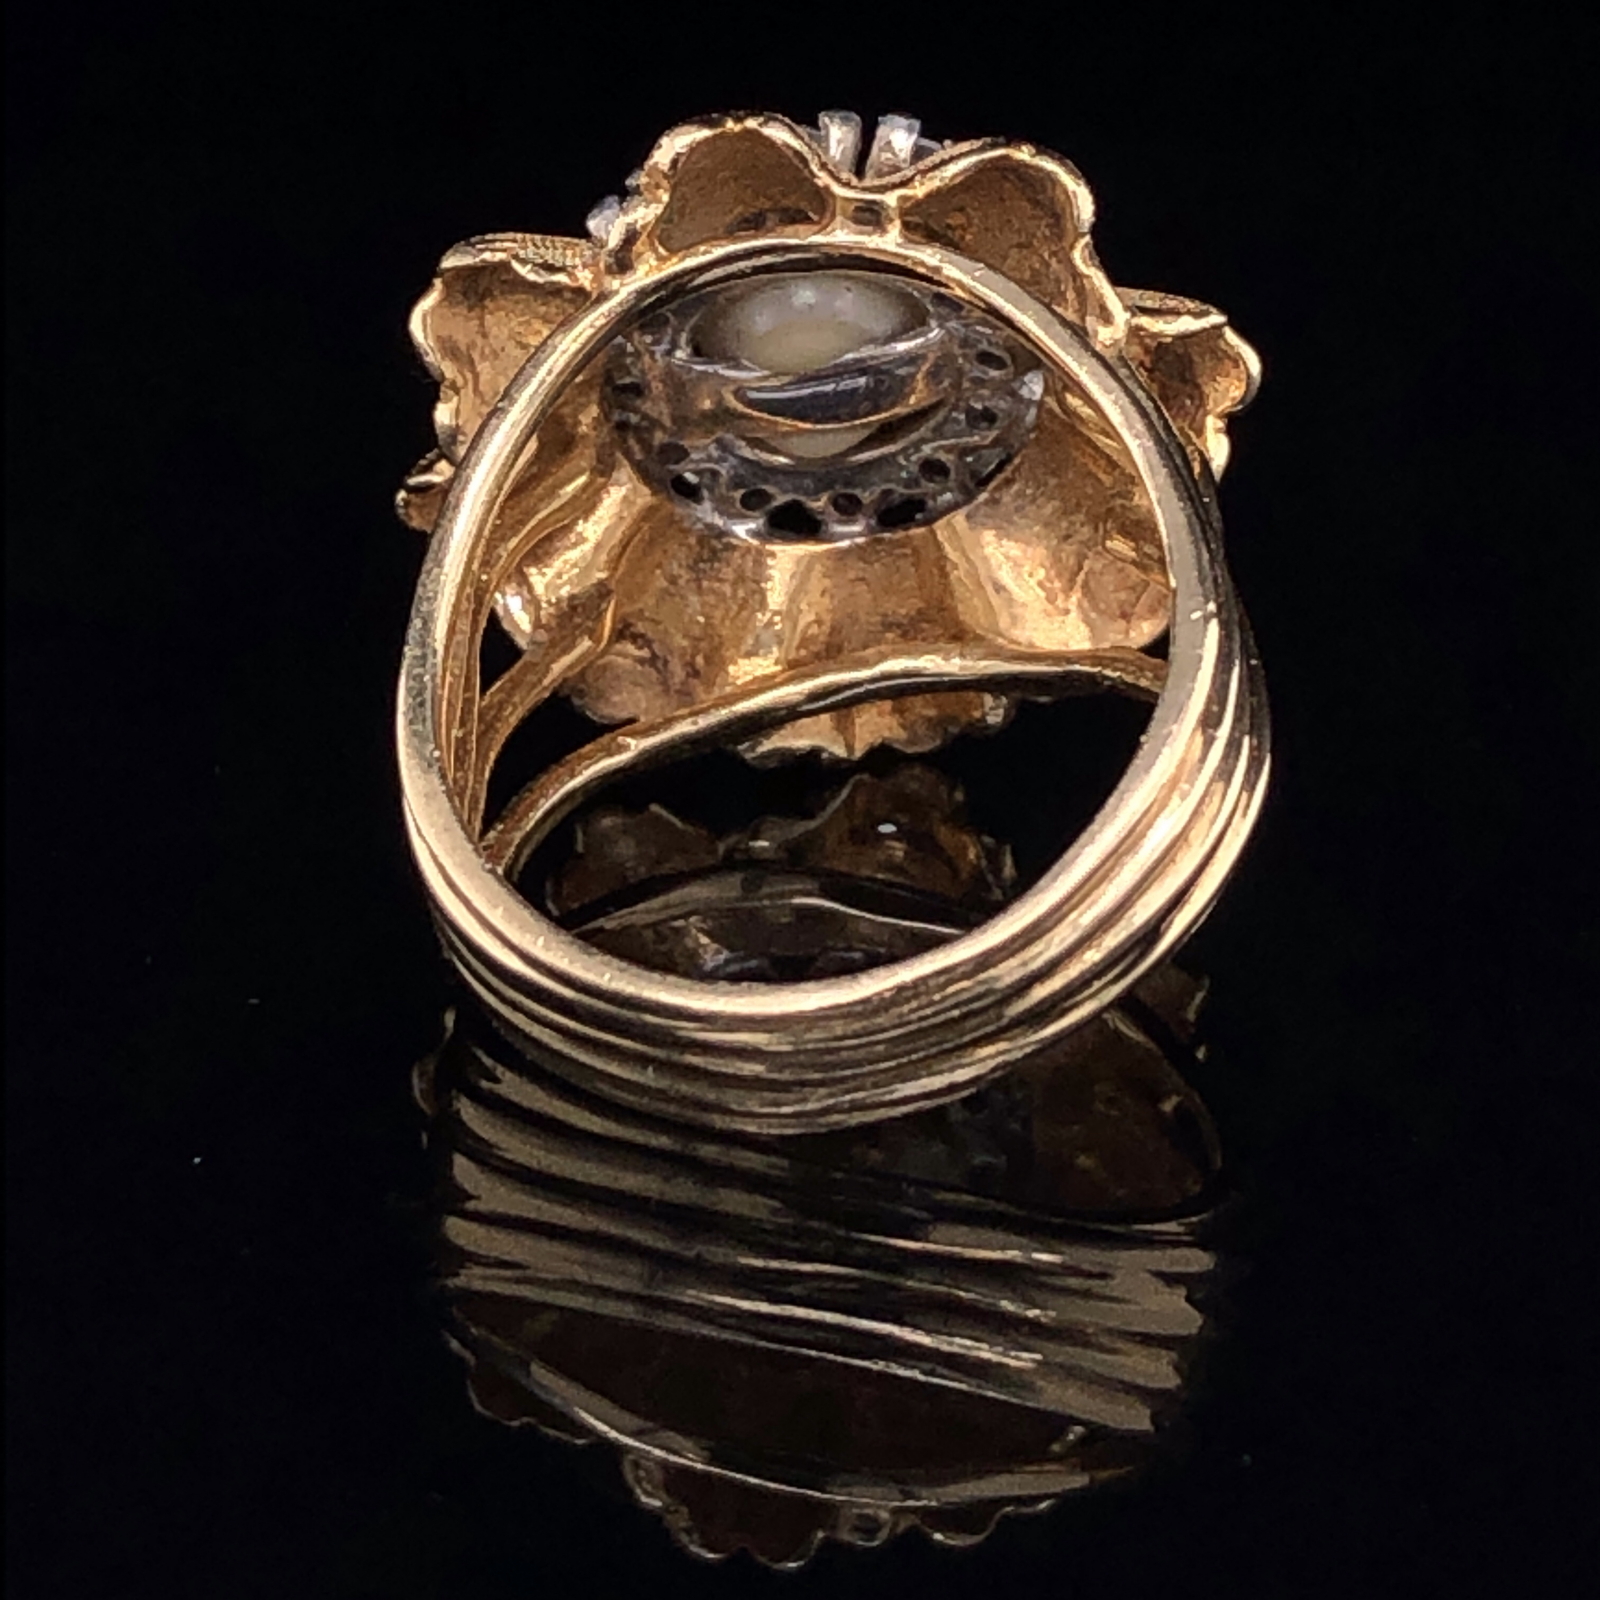 A 14ct GOLD PEARL AND DIAMOND VINTAGE RING. A SINGLE CULTURED PEARL SITS IN THE CENTRE OF A HALO - Image 7 of 7